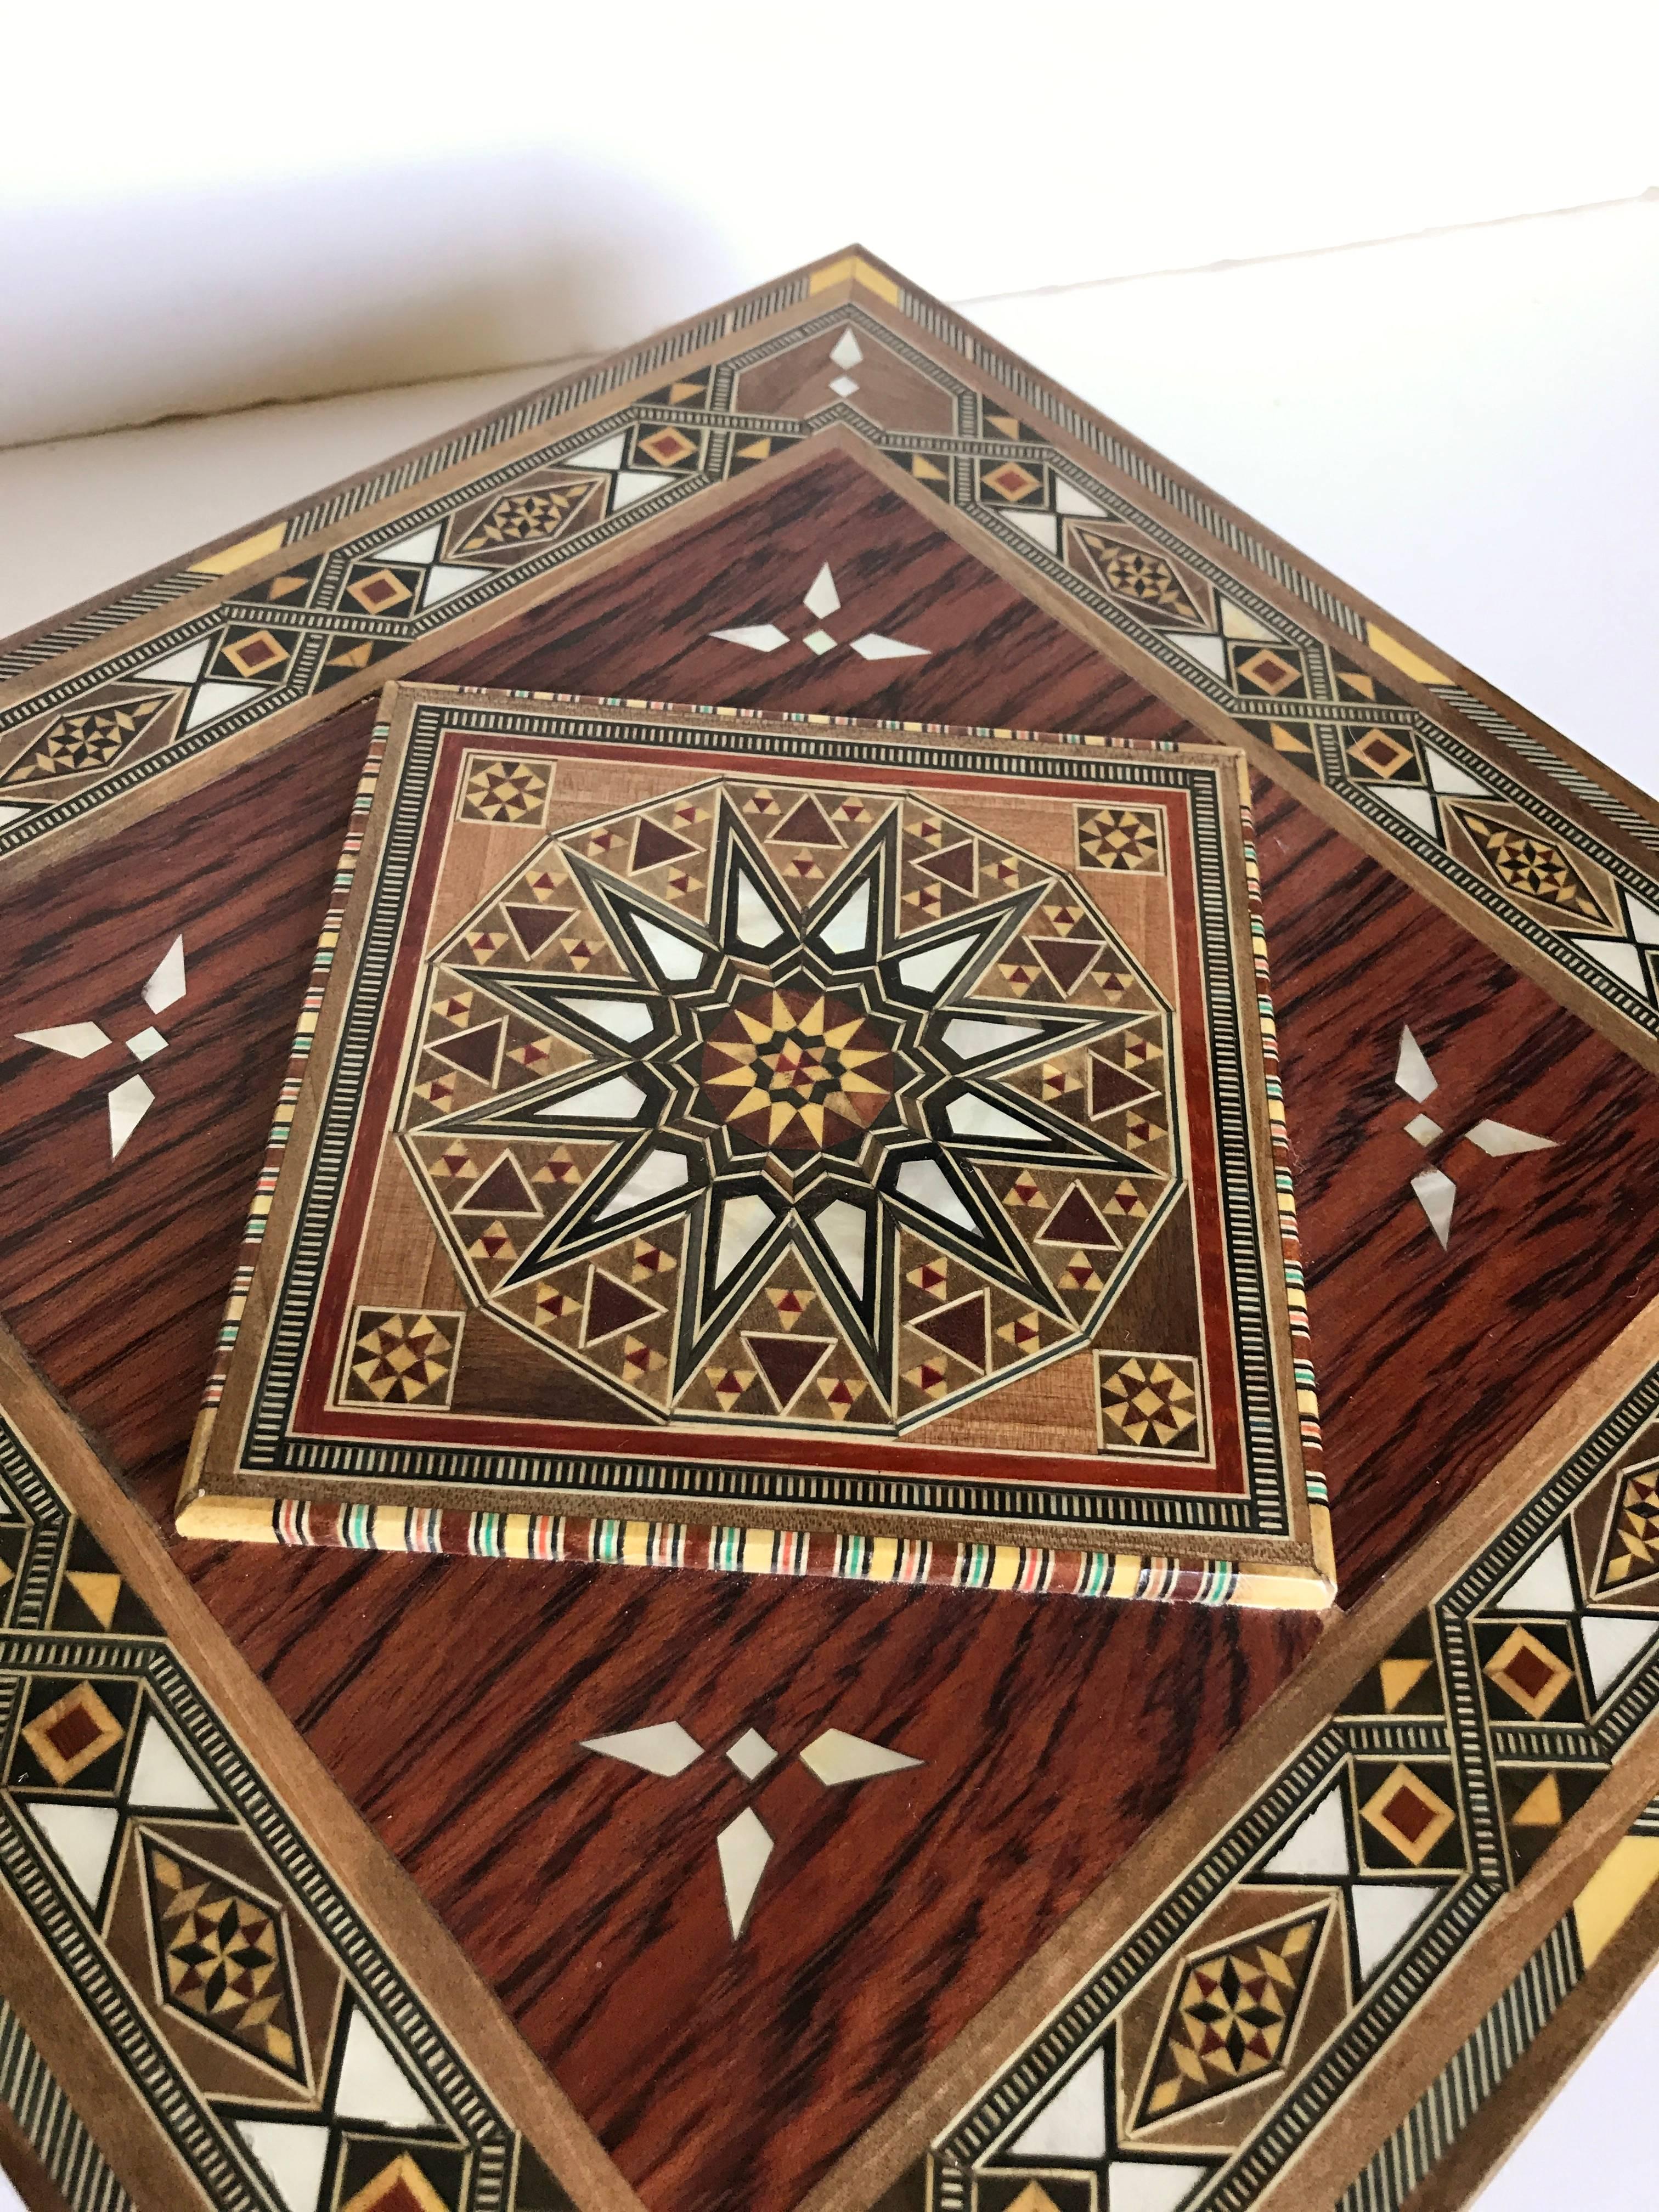 wooden box with mother of pearl inlay